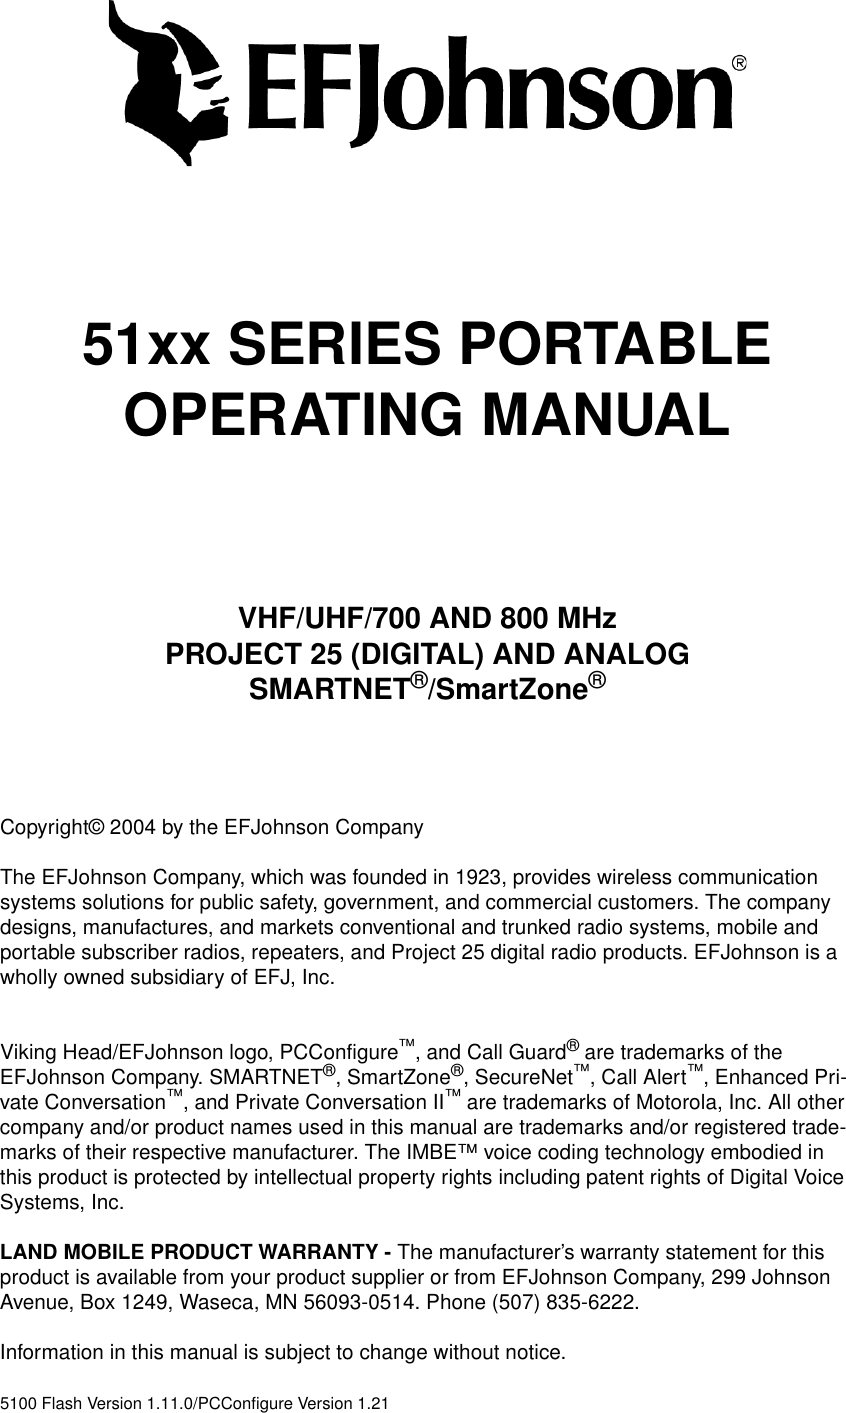 51xx SERIES PORTABLEOPERATING MANUALVHF/UHF/700 AND 800 MHzPROJECT 25 (DIGITAL) AND ANALOGSMARTNET®/SmartZone®Copyright© 2004 by the EFJohnson CompanyThe EFJohnson Company, which was founded in 1923, provides wireless communication systems solutions for public safety, government, and commercial customers. The company designs, manufactures, and markets conventional and trunked radio systems, mobile and portable subscriber radios, repeaters, and Project 25 digital radio products. EFJohnson is a wholly owned subsidiary of EFJ, Inc.Viking Head/EFJohnson logo, PCConfigure™, and Call Guard® are trademarks of the EFJohnson Company. SMARTNET®, SmartZone®, SecureNet™, Call Alert™, Enhanced Pri-vate Conversation™, and Private Conversation II™ are trademarks of Motorola, Inc. All other company and/or product names used in this manual are trademarks and/or registered trade-marks of their respective manufacturer. The IMBE™ voice coding technology embodied in this product is protected by intellectual property rights including patent rights of Digital Voice Systems, Inc.LAND MOBILE PRODUCT WARRANTY - The manufacturer’s warranty statement for this product is available from your product supplier or from EFJohnson Company, 299 Johnson Avenue, Box 1249, Waseca, MN 56093-0514. Phone (507) 835-6222.Information in this manual is subject to change without notice. 5100 Flash Version 1.11.0/PCConfigure Version 1.21